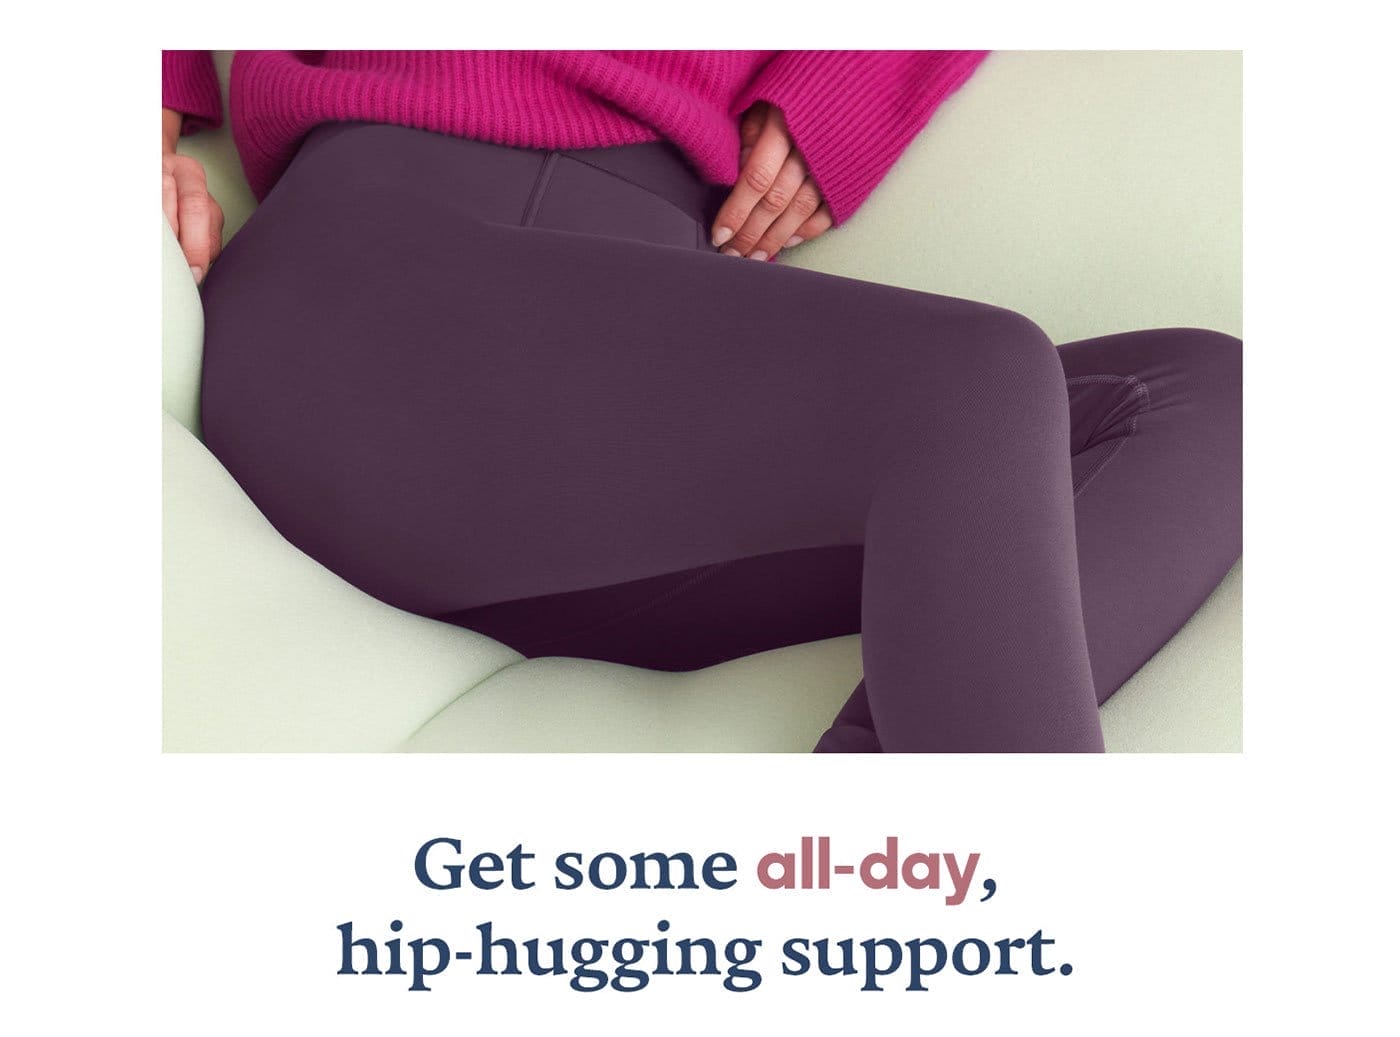 Get some all-day, hip-hugging support.